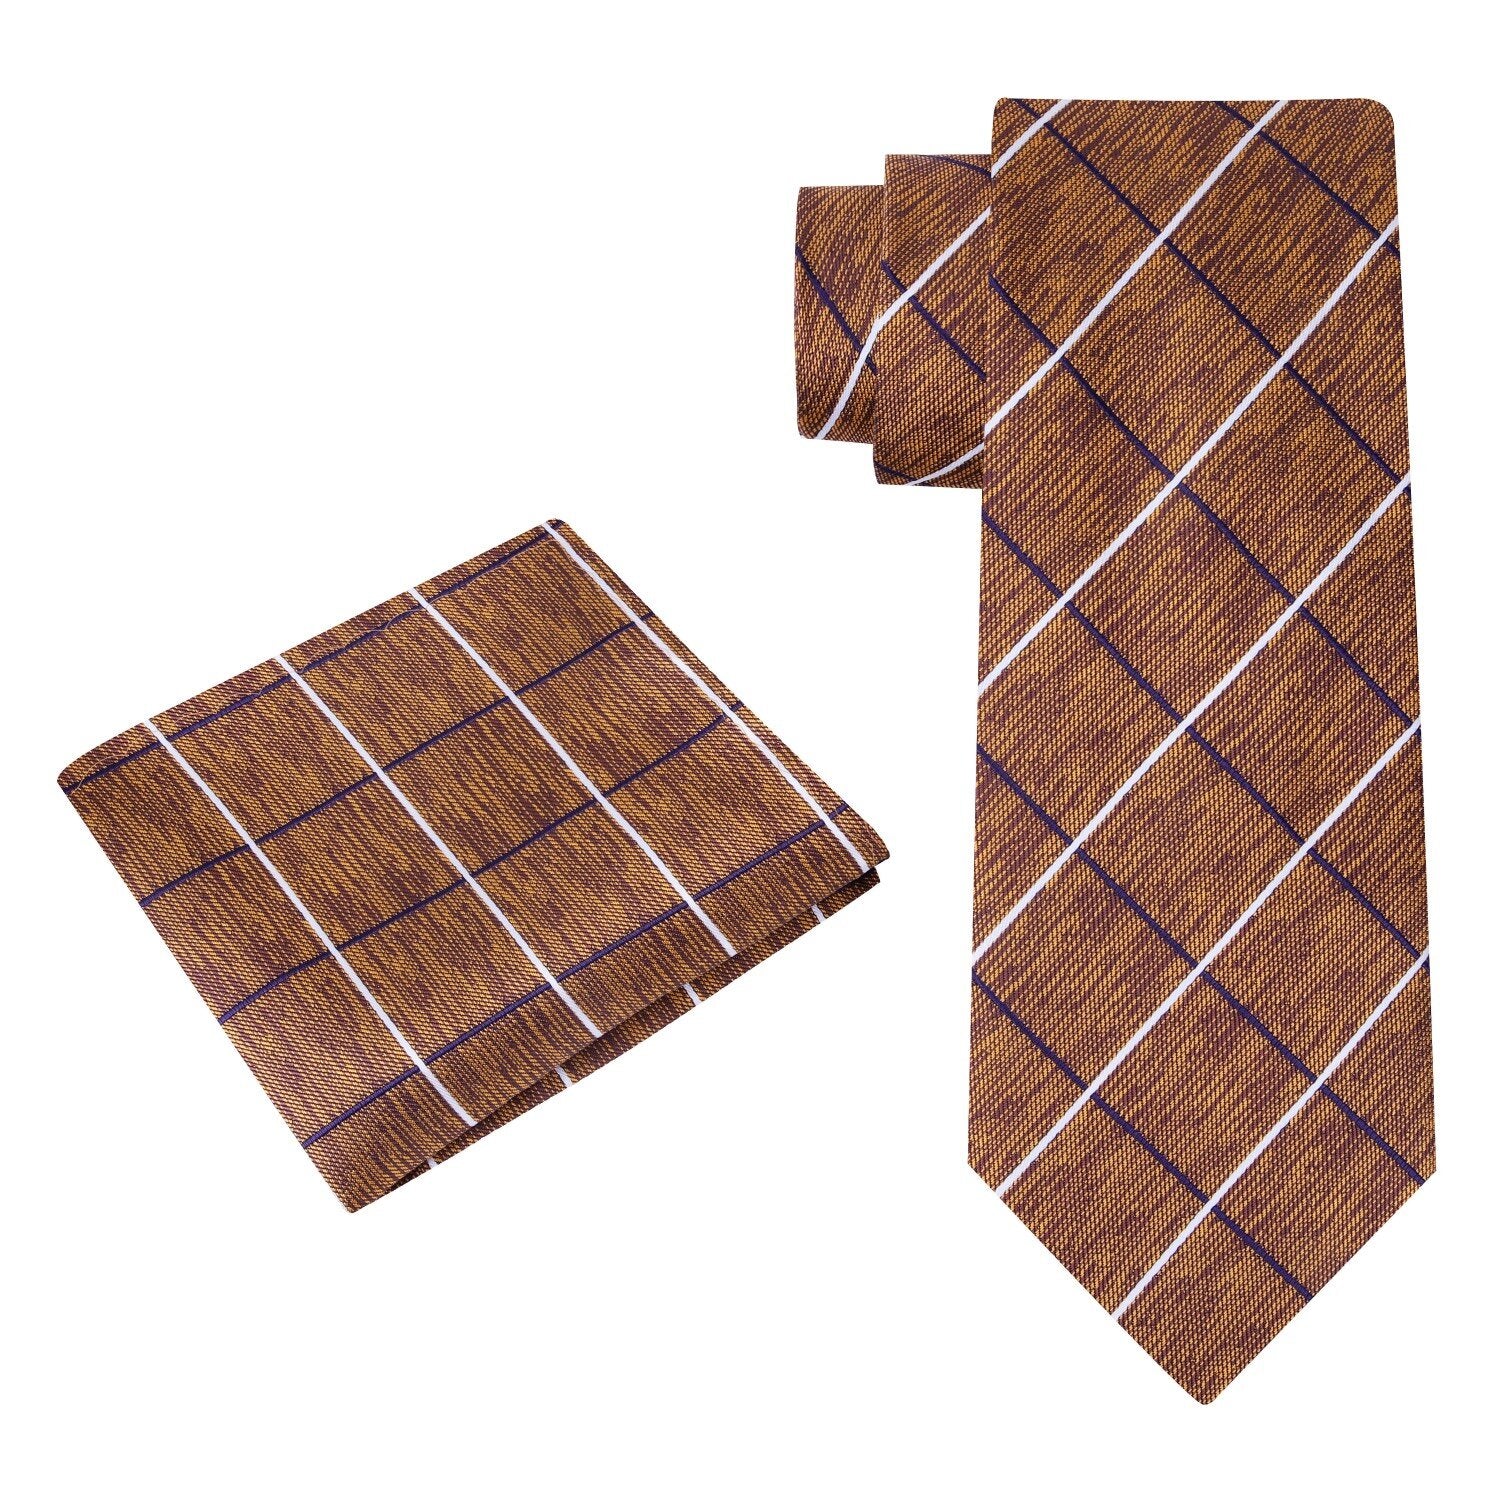 Alt View: A Rich Brown, Navy Purple And White Cream Plaid Geometric Pattern Silk Necktie With Matching Pocket Square